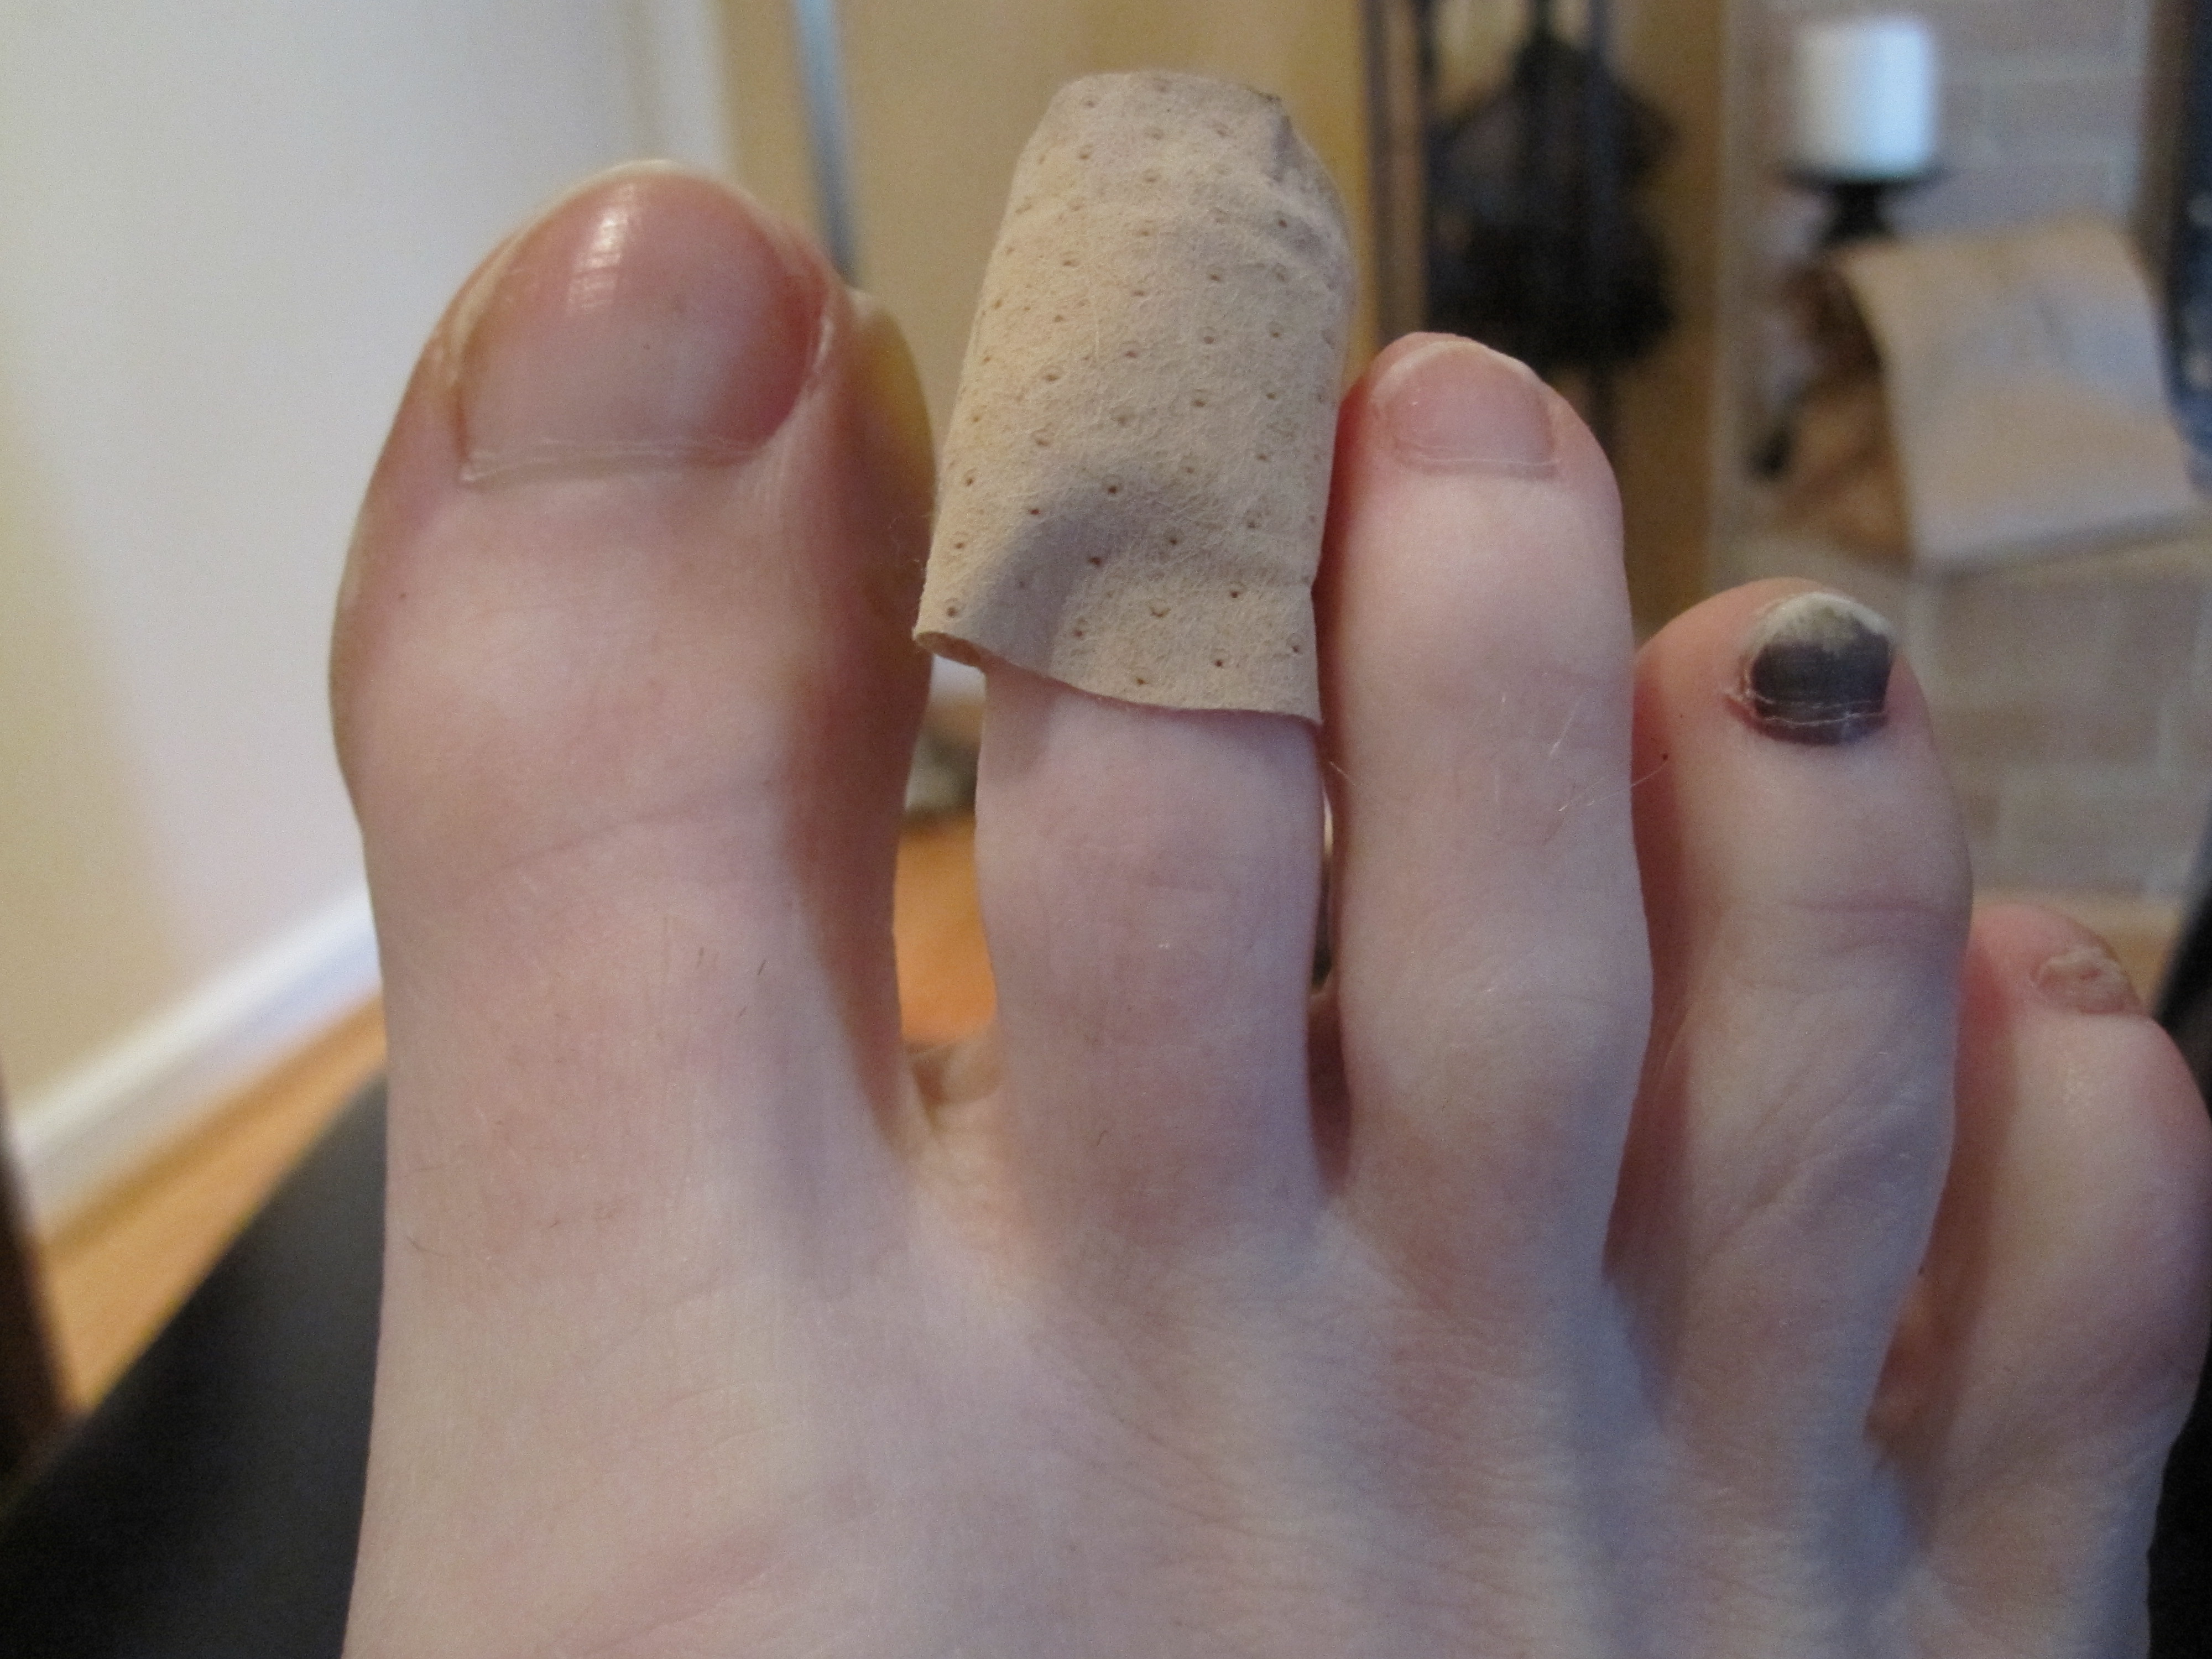 Blisters, Black Toenails and Runner's Feet: Bad & The Ugly (There is Good)